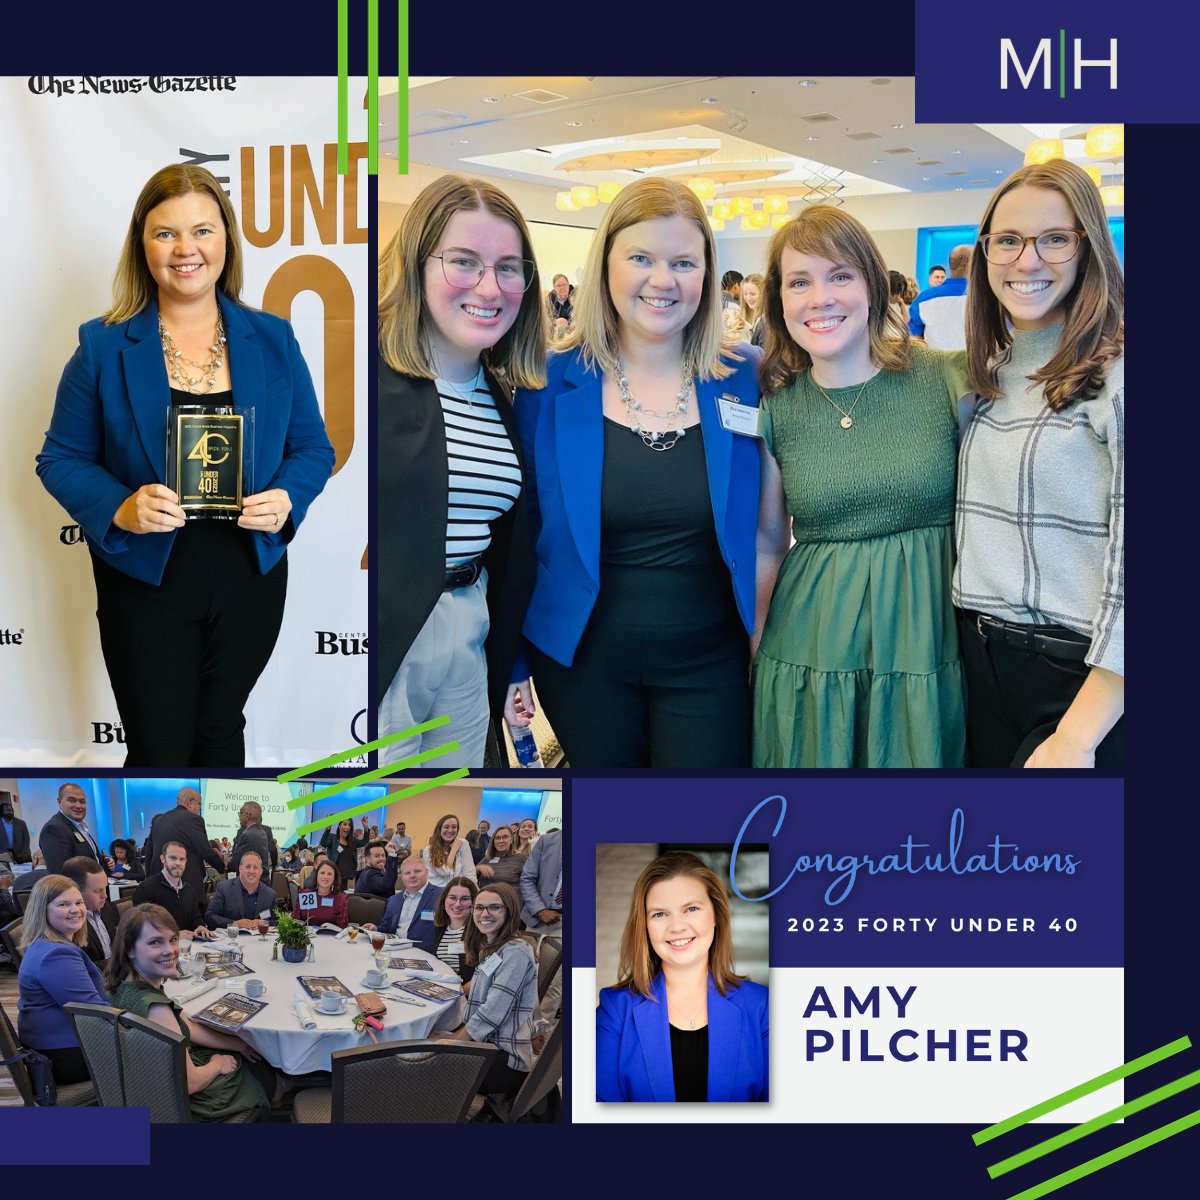 MH proudly congratulates Amy Pilcher on being named a 2023 Forty Under 40 winner. 🎉 Amy's leadership, talent, and character are a vital part of our firm and have made a lasting impact in the community. 
#FortyUnder40 #Auditor #Accounting #Leadership #WomenInAccounting